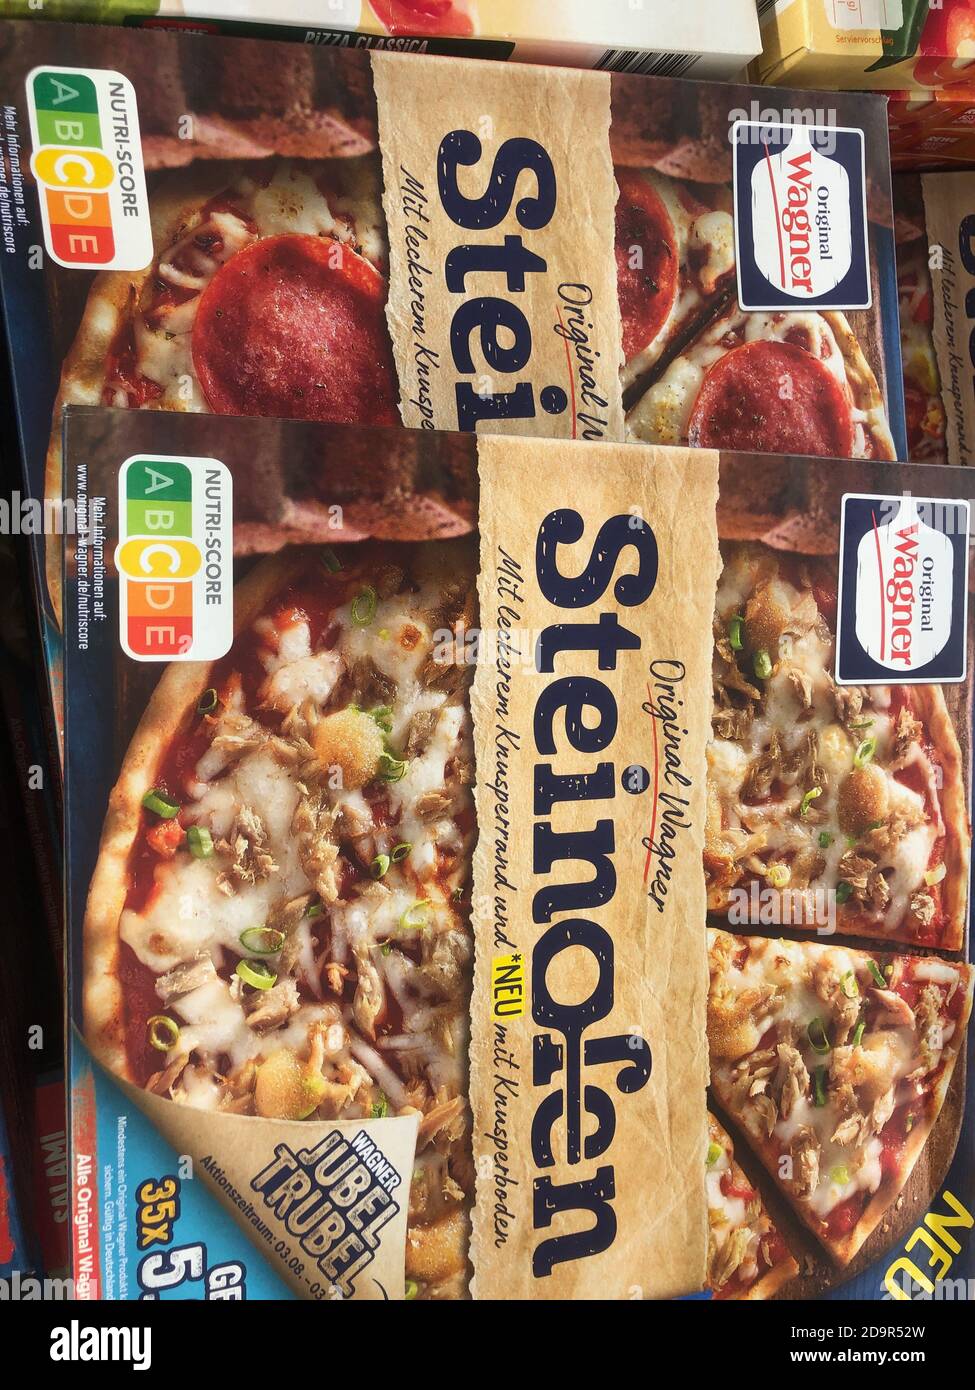 Berlin, Germany. 05th Nov, 2020. Two stone oven pizzas from the Wagner  company with different Nutri-Score lie next to each other. The left one is  the pizza "Diavolo" and the right one